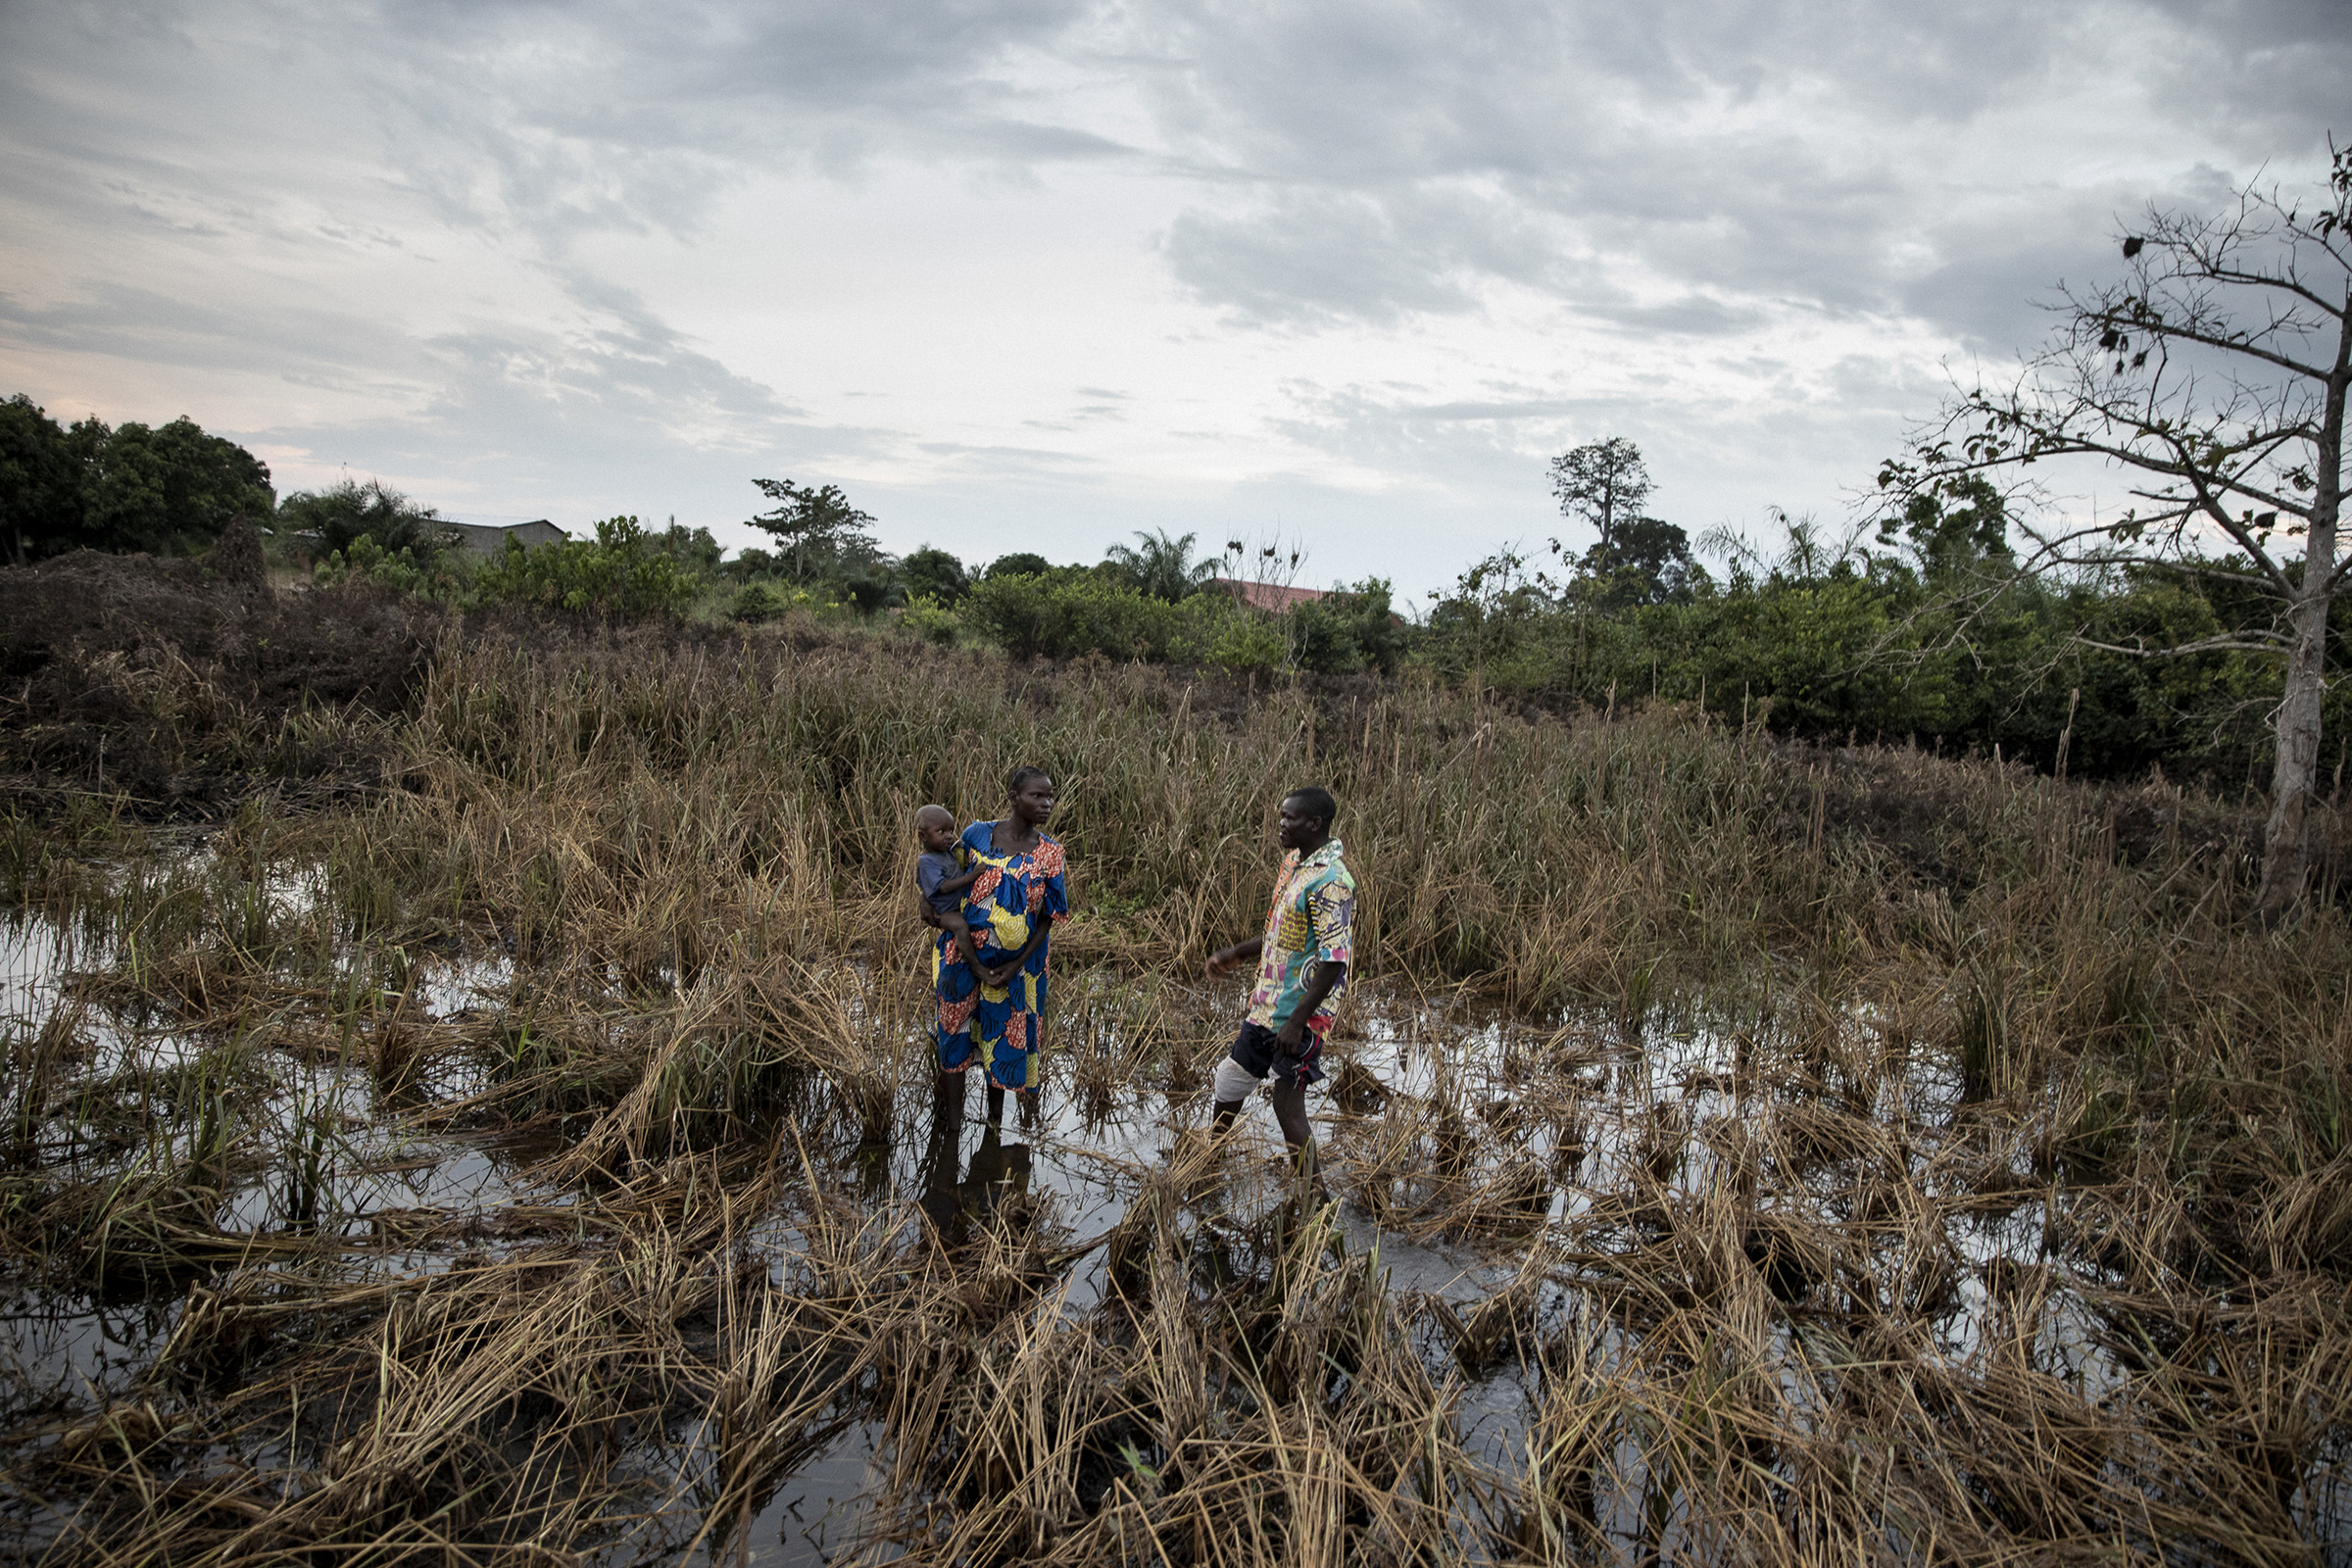 A neighbor and Locadie Lapenda, a 30-year old mother of four stand in her flooded rice field on Nov. 24, 2019. (Adrienne Surprenant—Greenpeace)